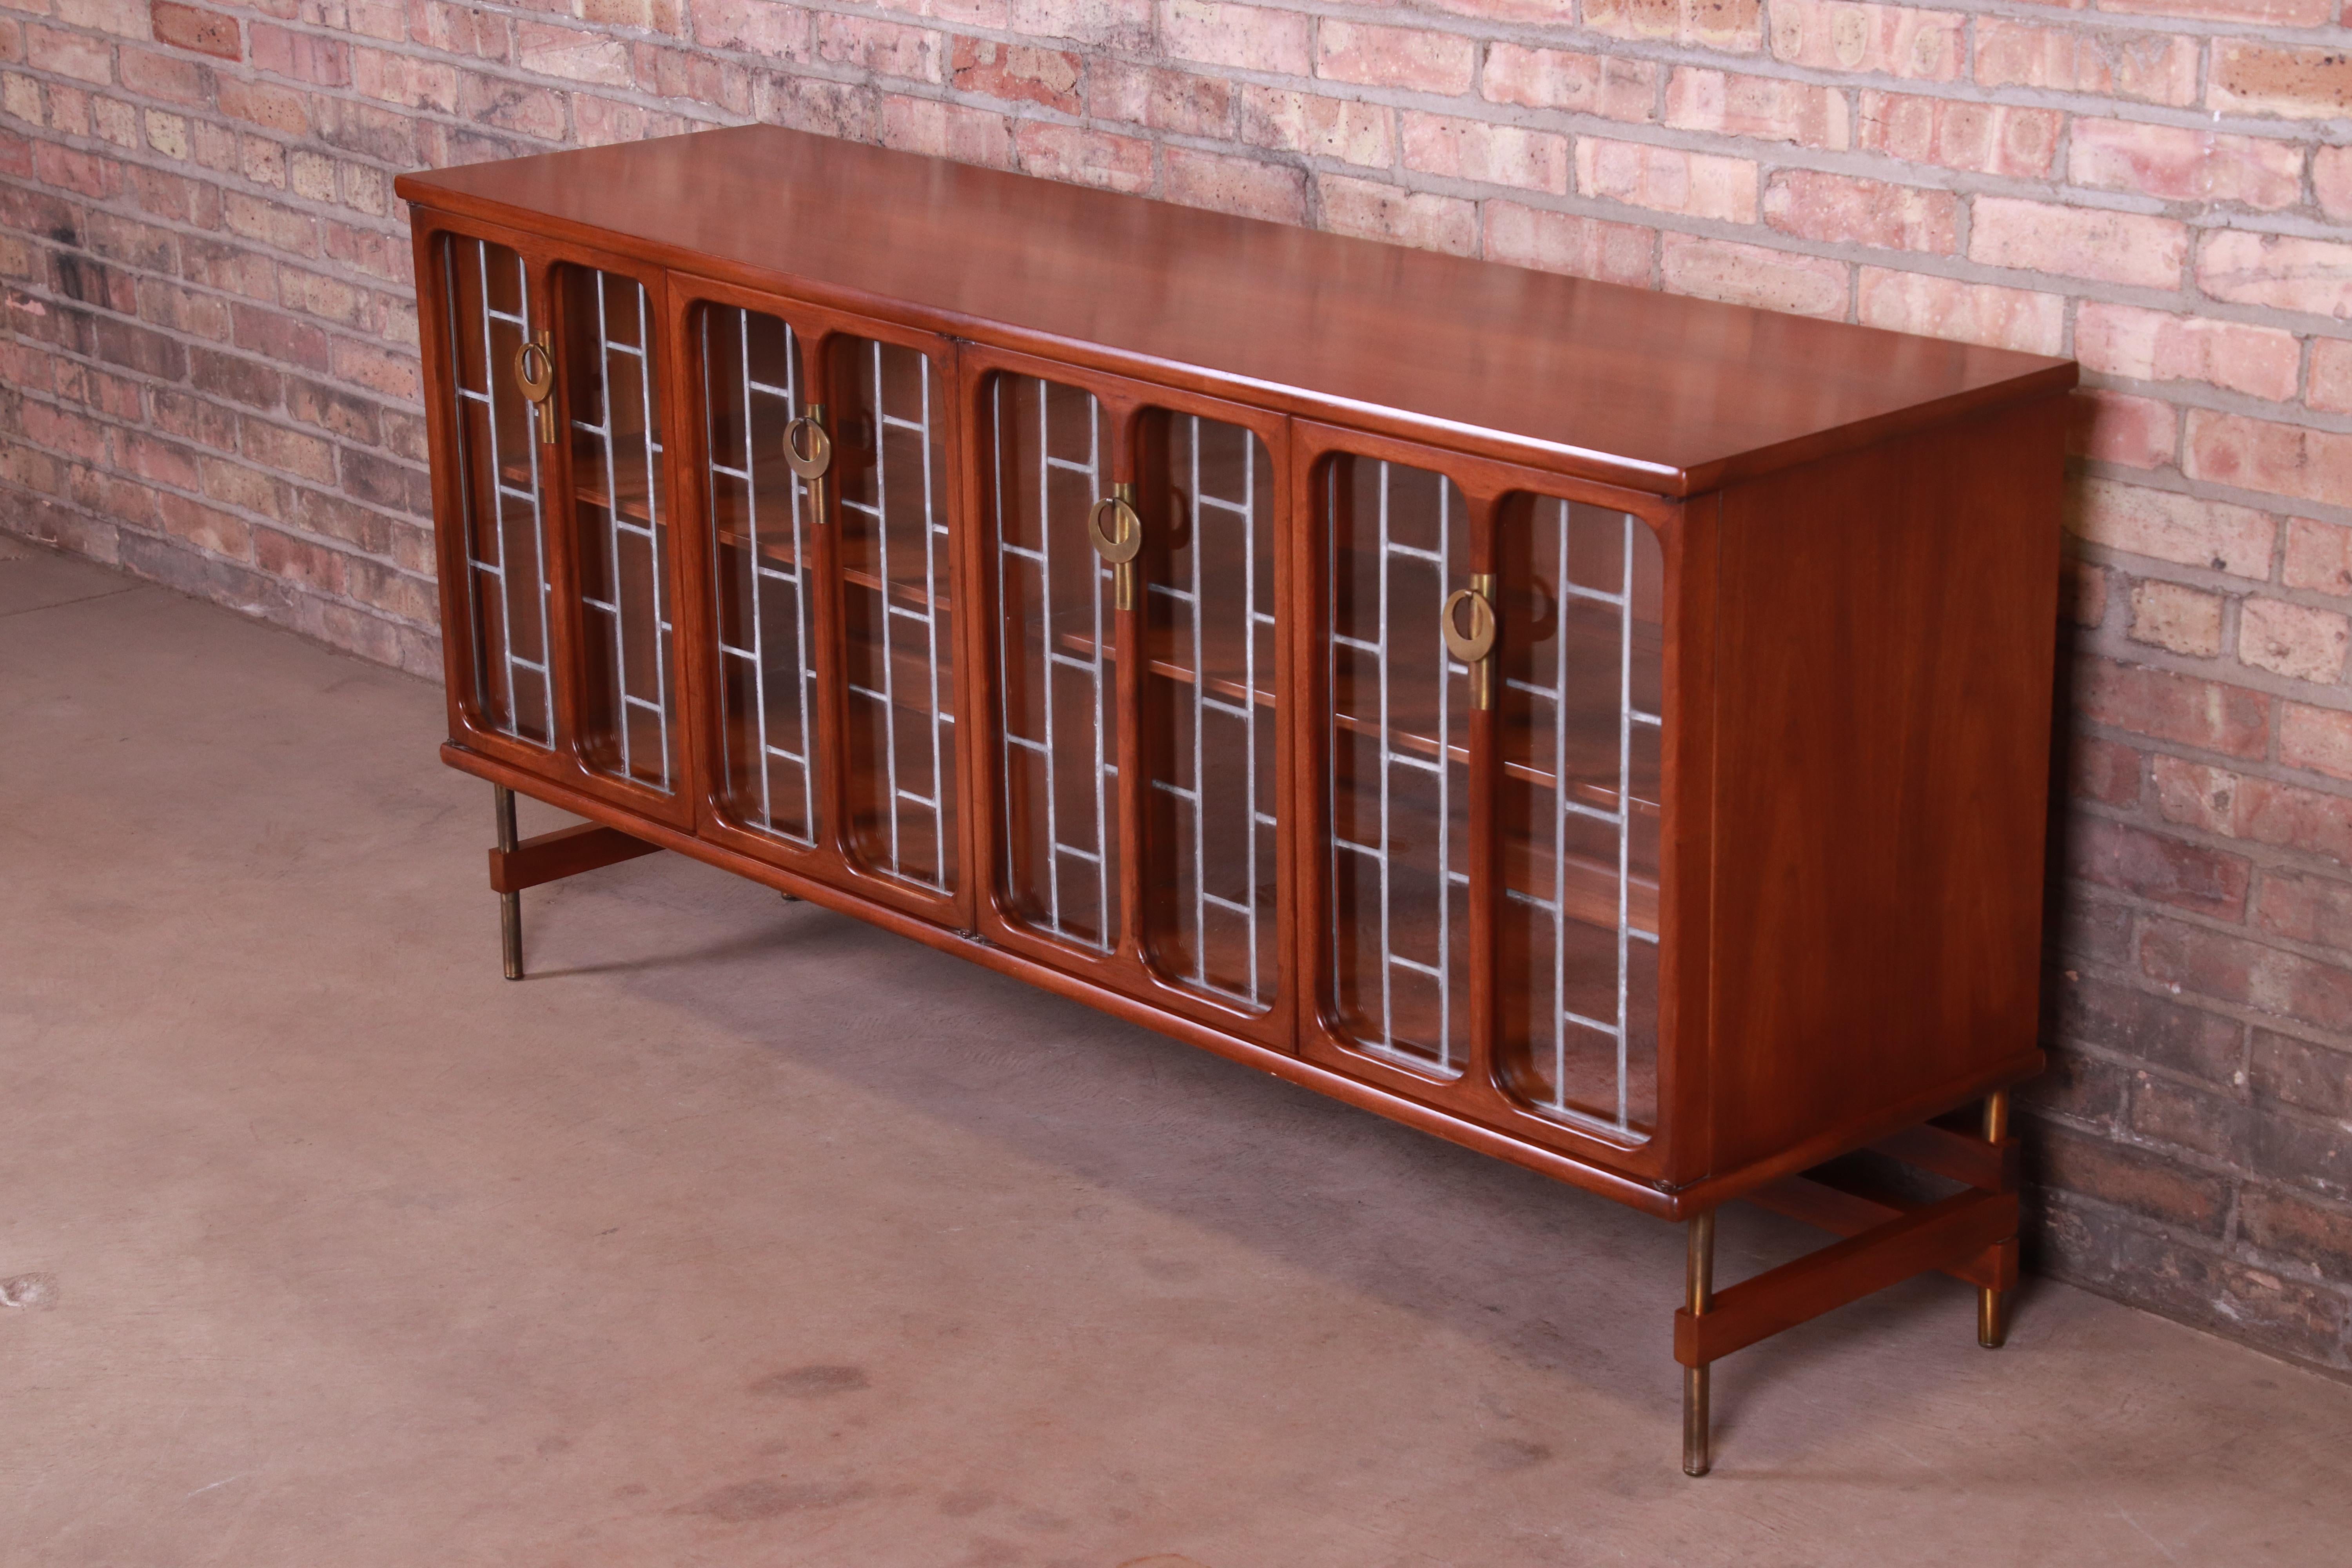 American Mid-Century Modern Walnut Leaded Glass Bookcase by White Furniture, circa 1960s